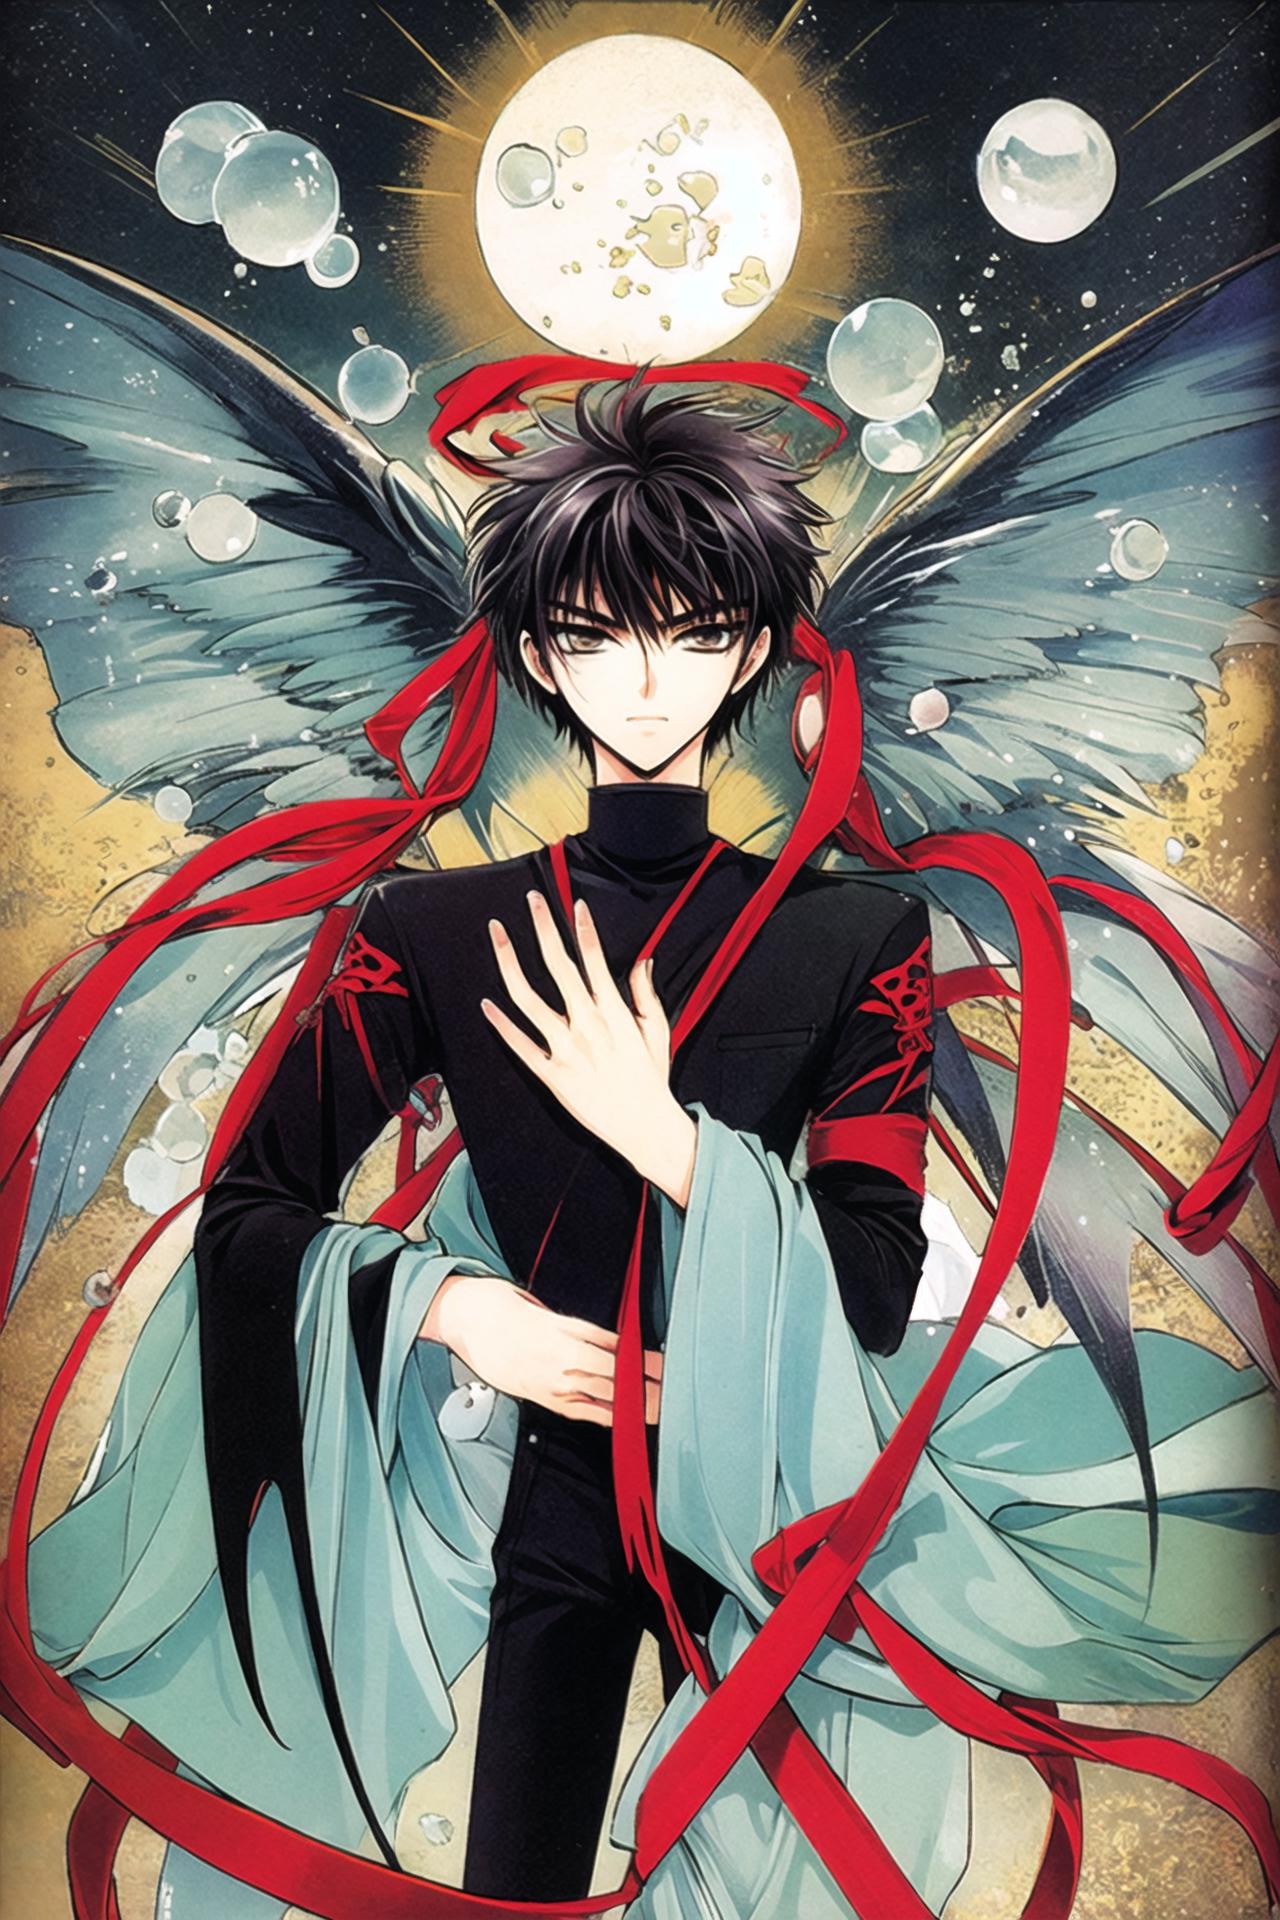 Why does no one talk about CLAMP and how amazing they are and their mangas  are out of this world!!? XXX HOLIC , CARDCAPTOR SAKURA , CHRONICLES OF  TSUBASA to name a